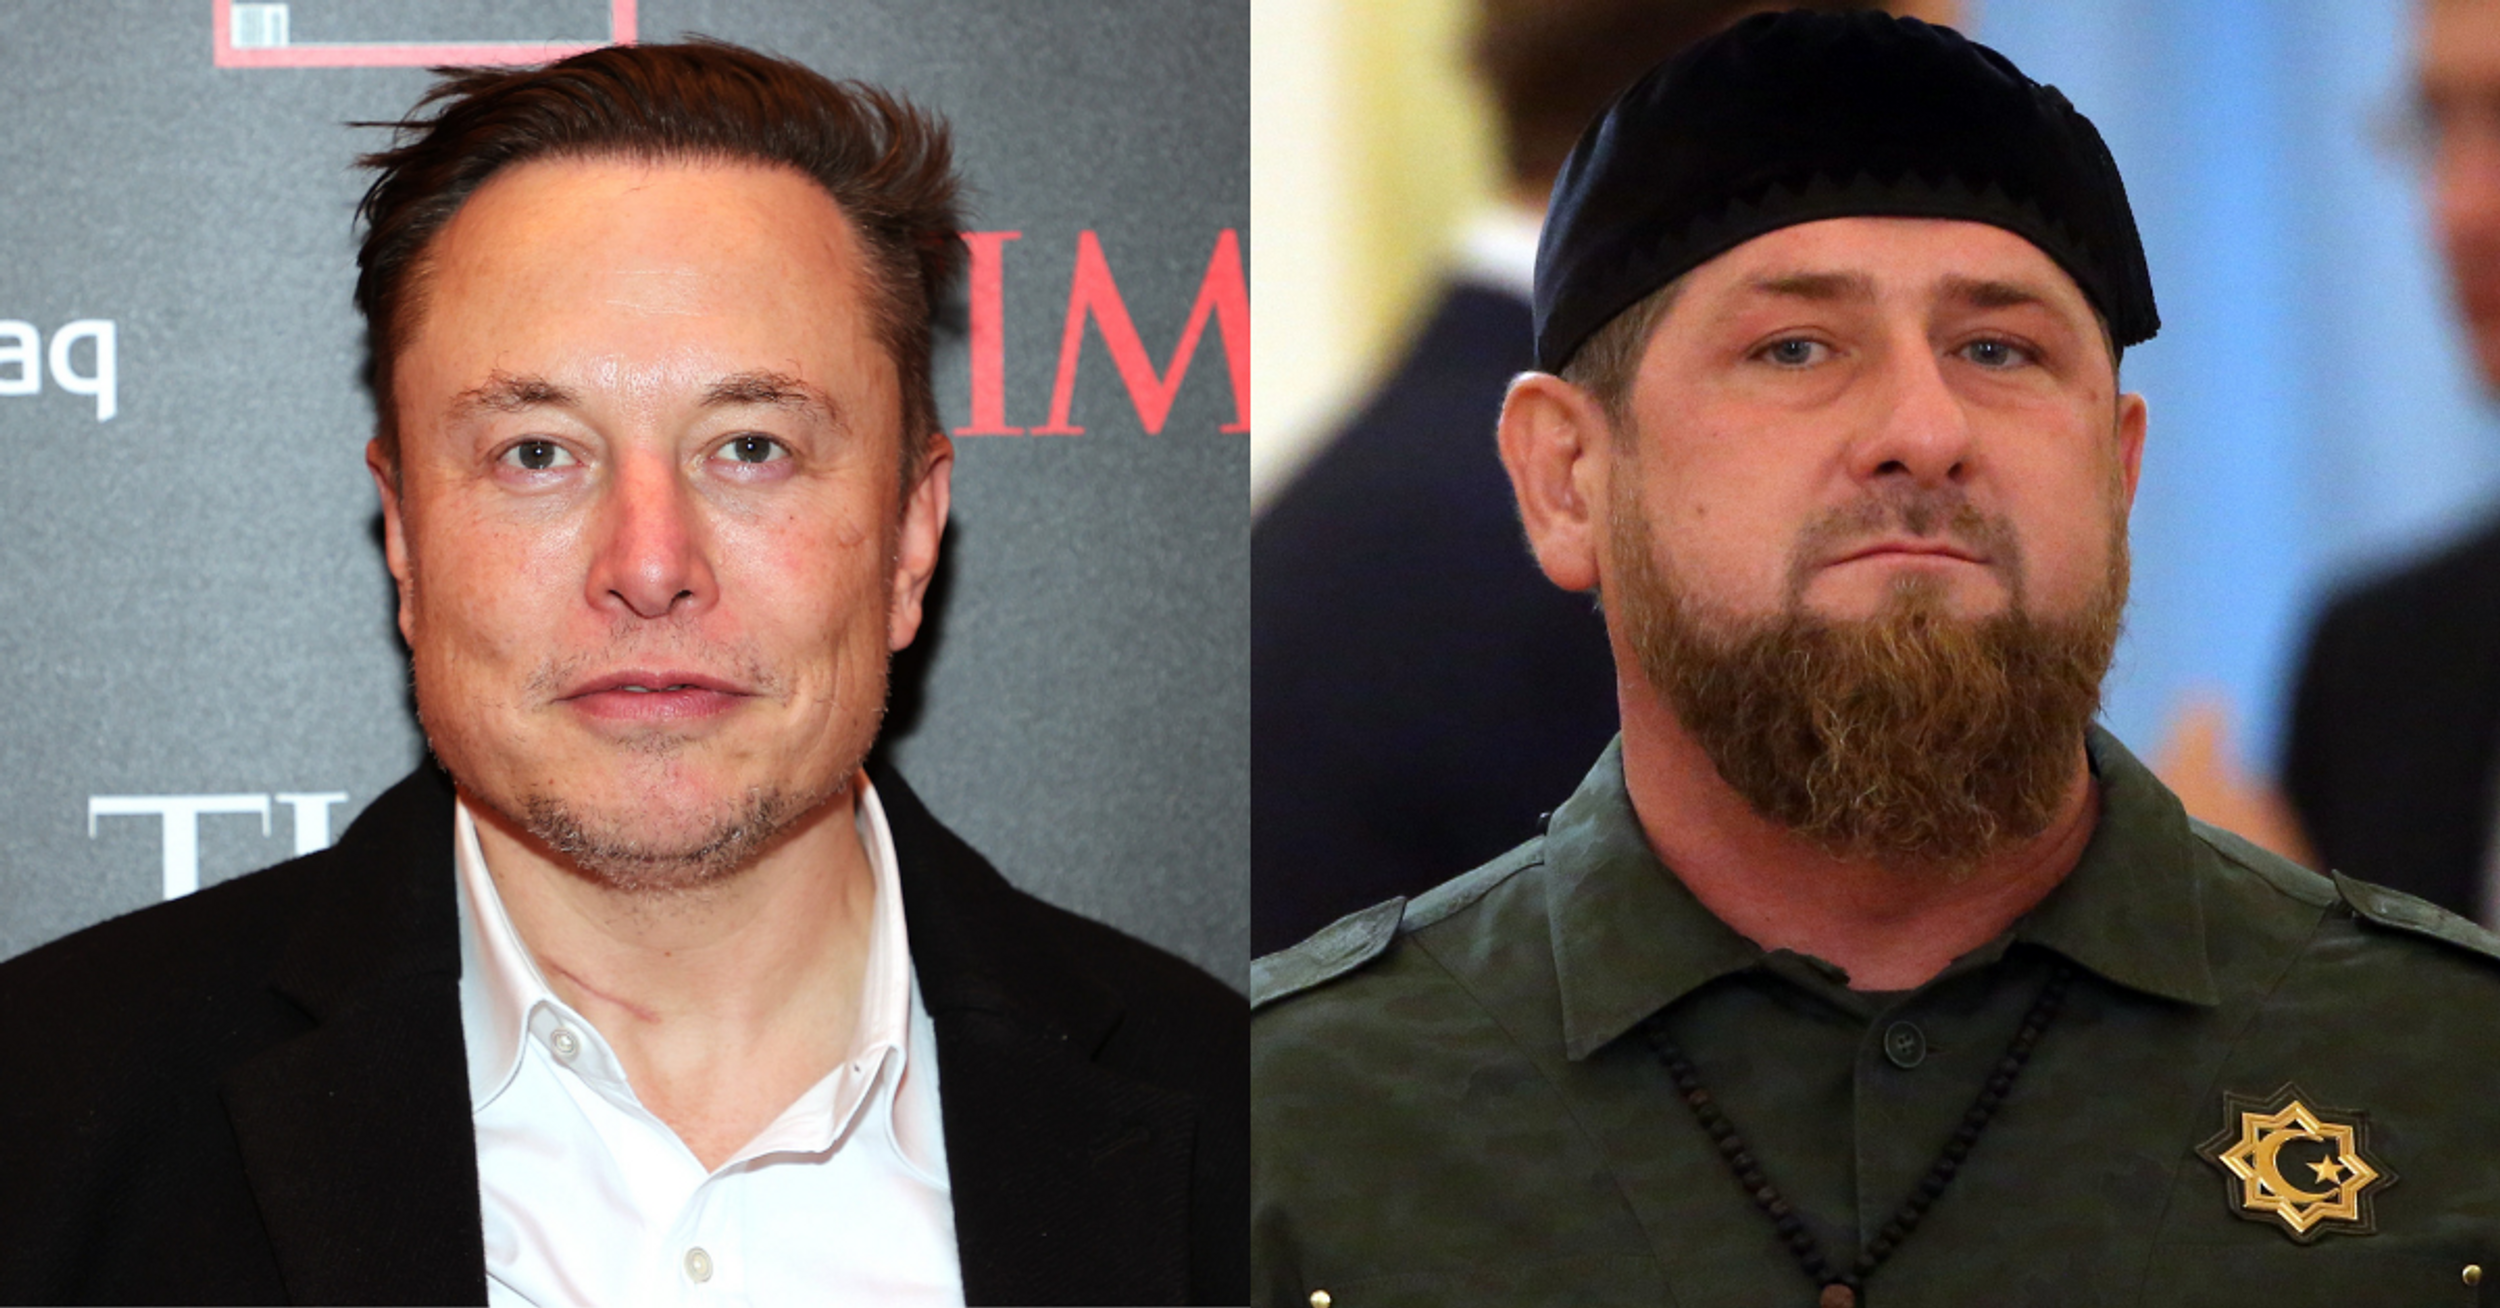 Elon Musk Trolls Chechen Leader Who Called Him 'Effeminate' By Changing His Twitter Name